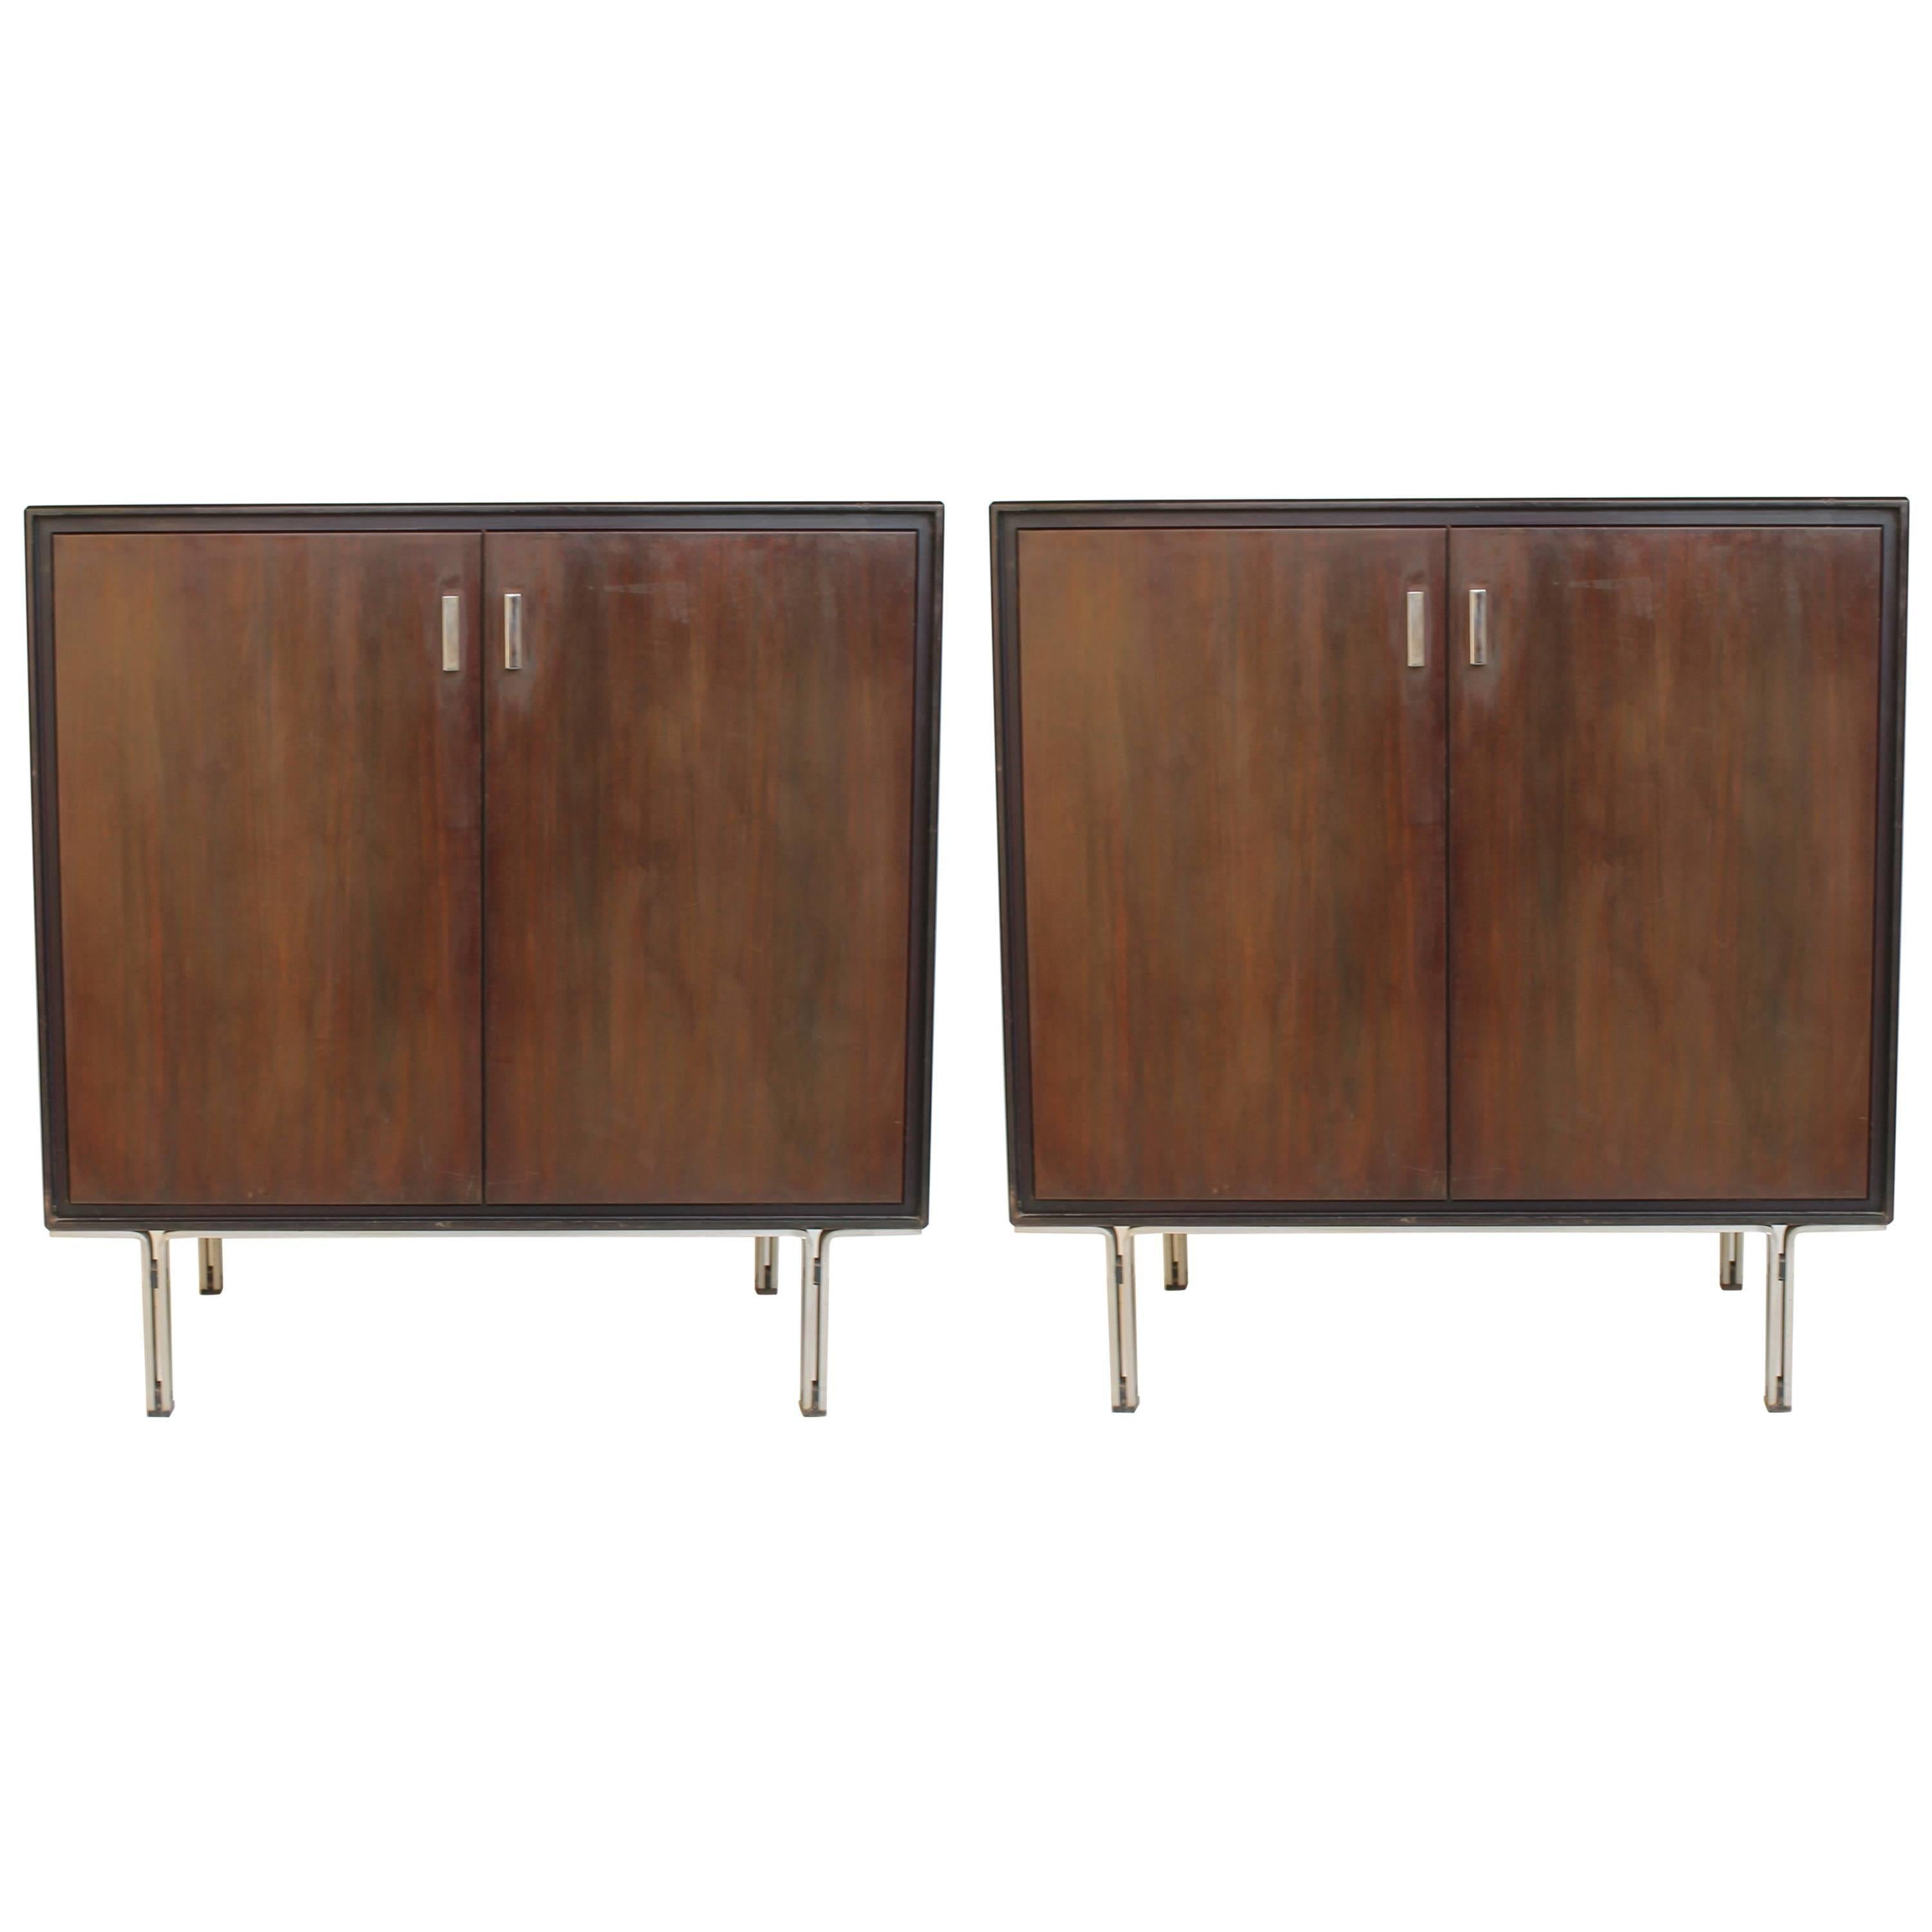 Two Formanova Cabinets by Gianni Moscatelli, circa 1965